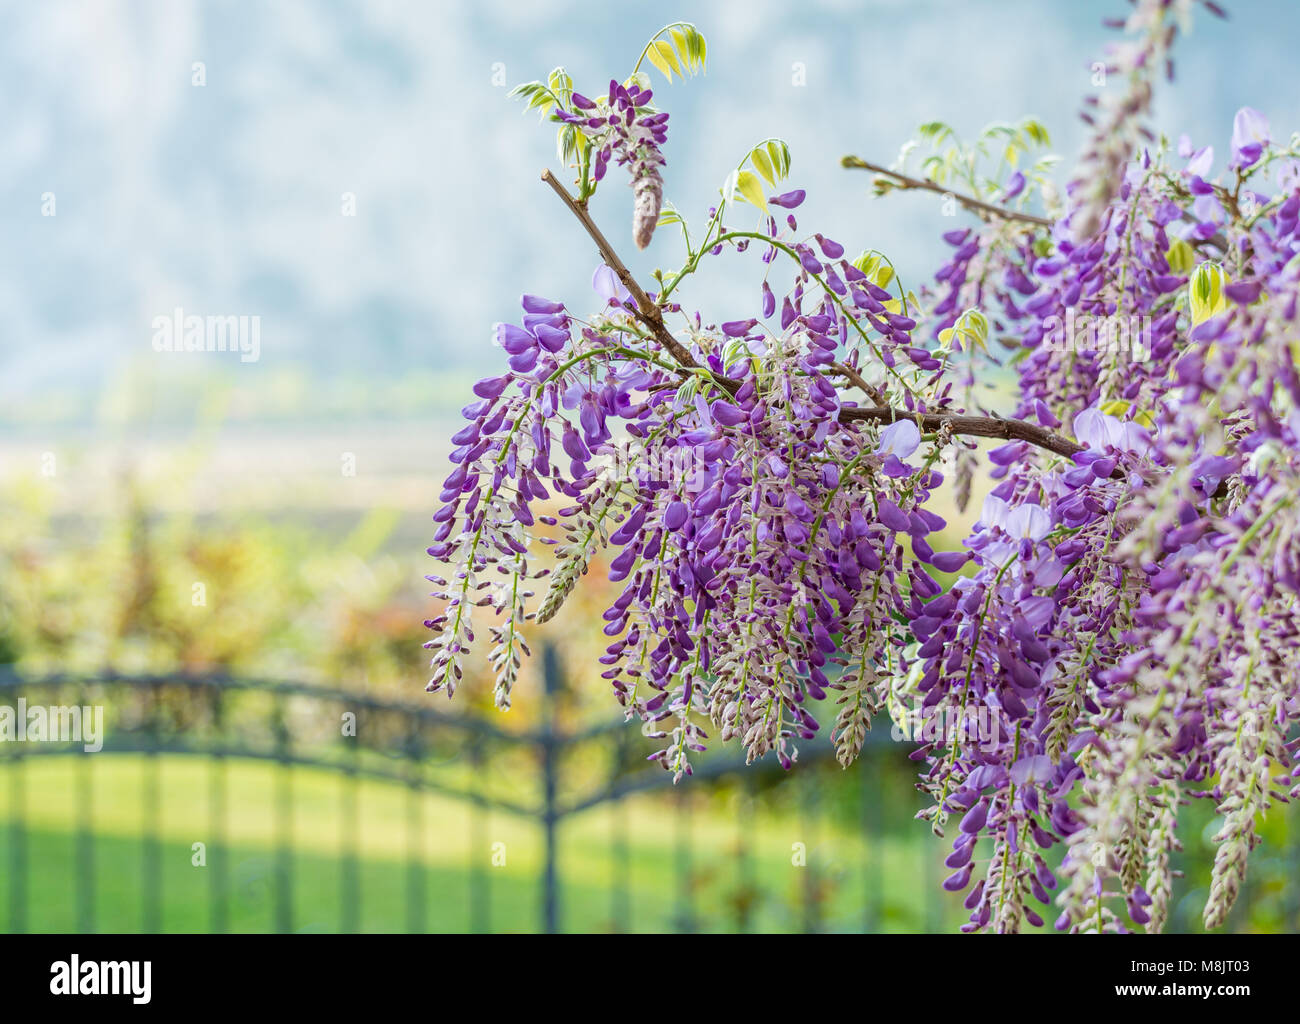 Wisteria flowers. Wisteria (also spelled Wistaria or Wysteria) is a genus of flowering plants in the legume family, Fabaceae (Leguminosae). Stock Photo